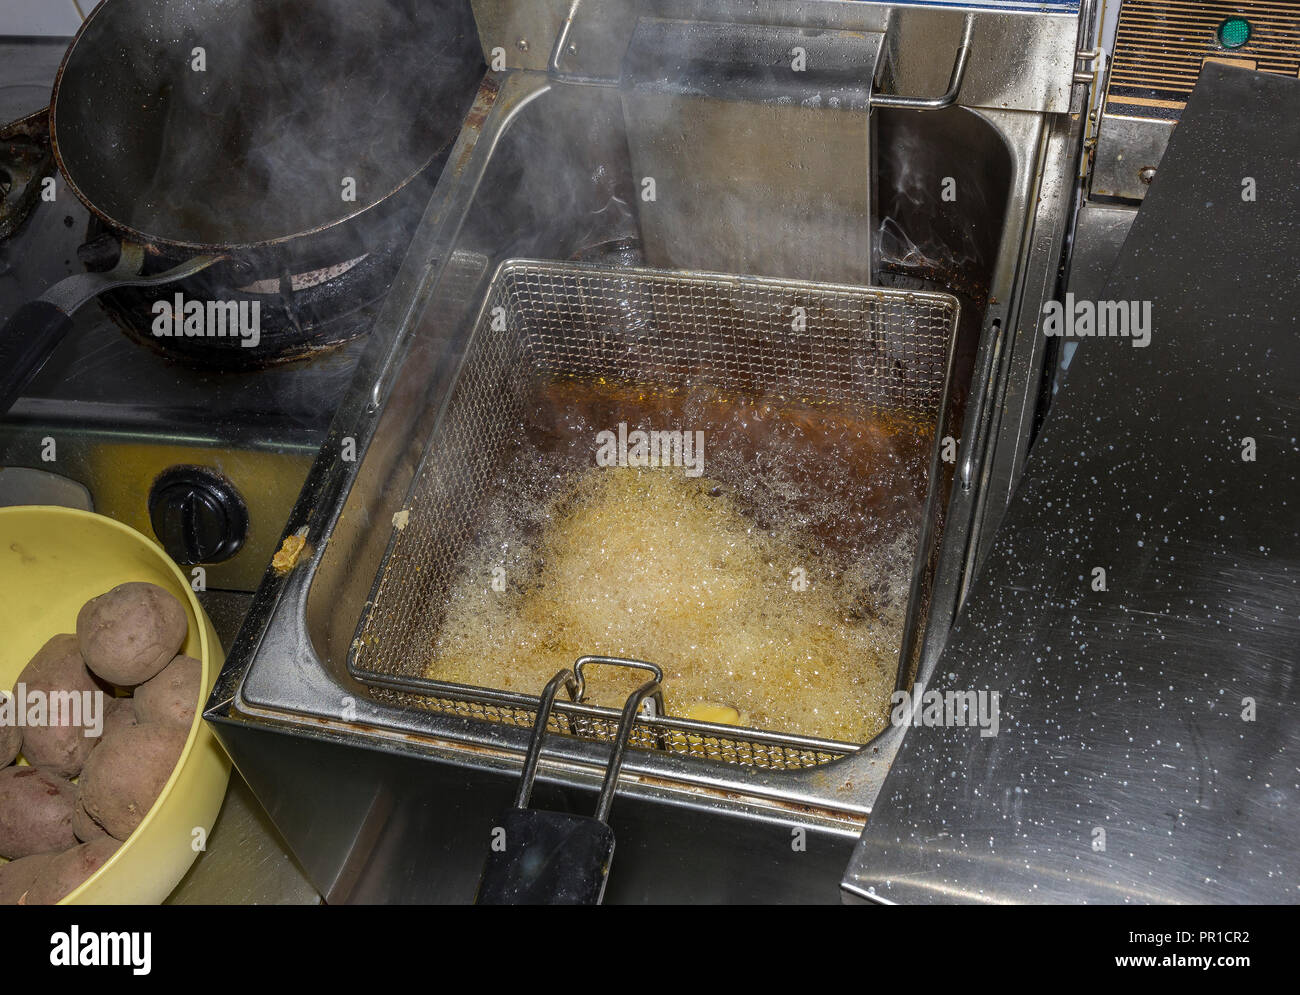 fryer for potatoes with fries with boiling oil. Concept fast food restaurant,  kitchen equipment Stock Photo